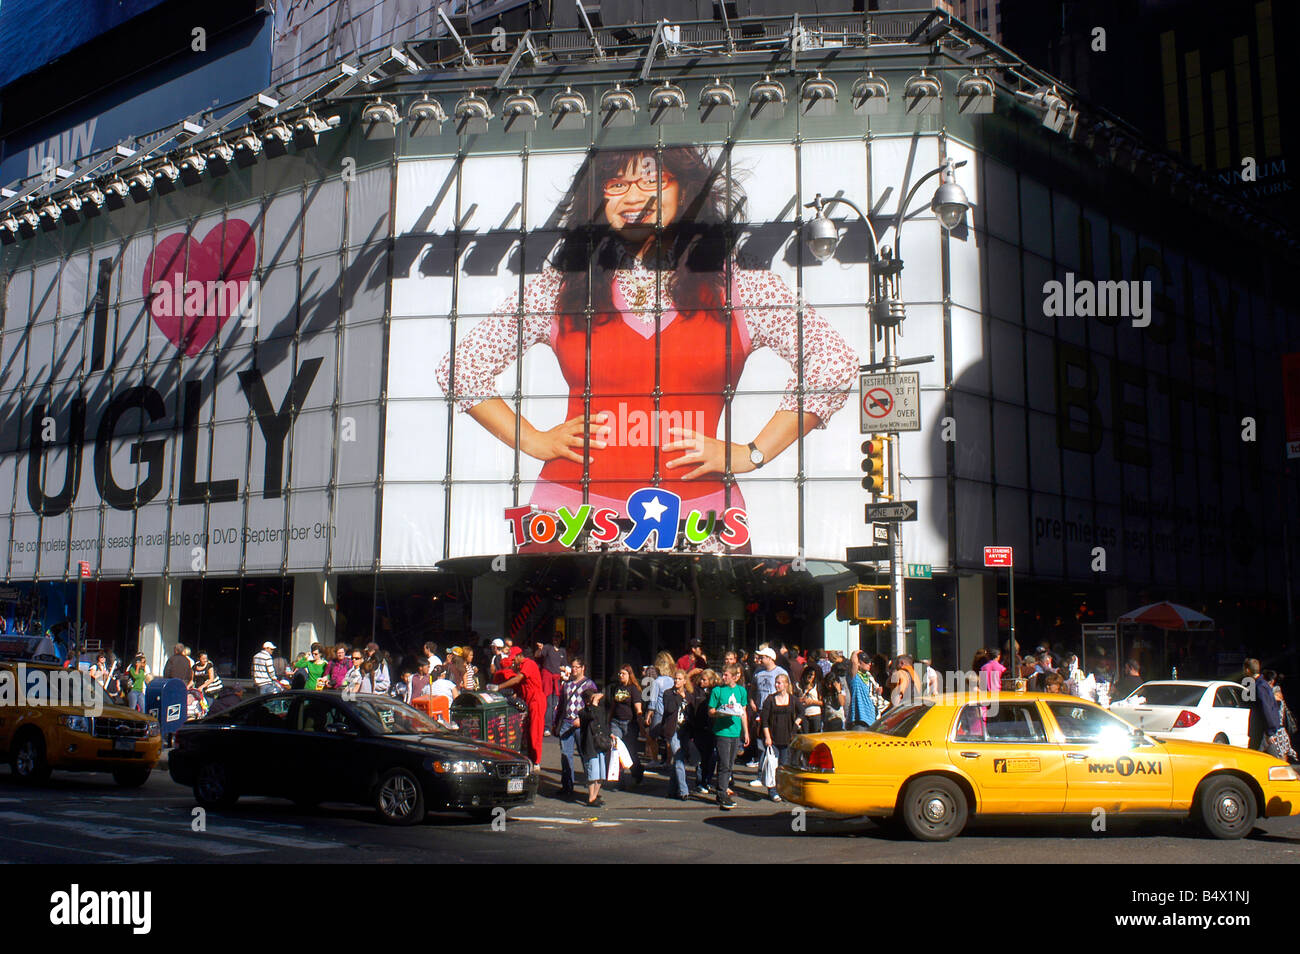 Advertising for the ABC television program Ugly Betty appears on a billboard on the Toys R Us store in Times Square Stock Photo